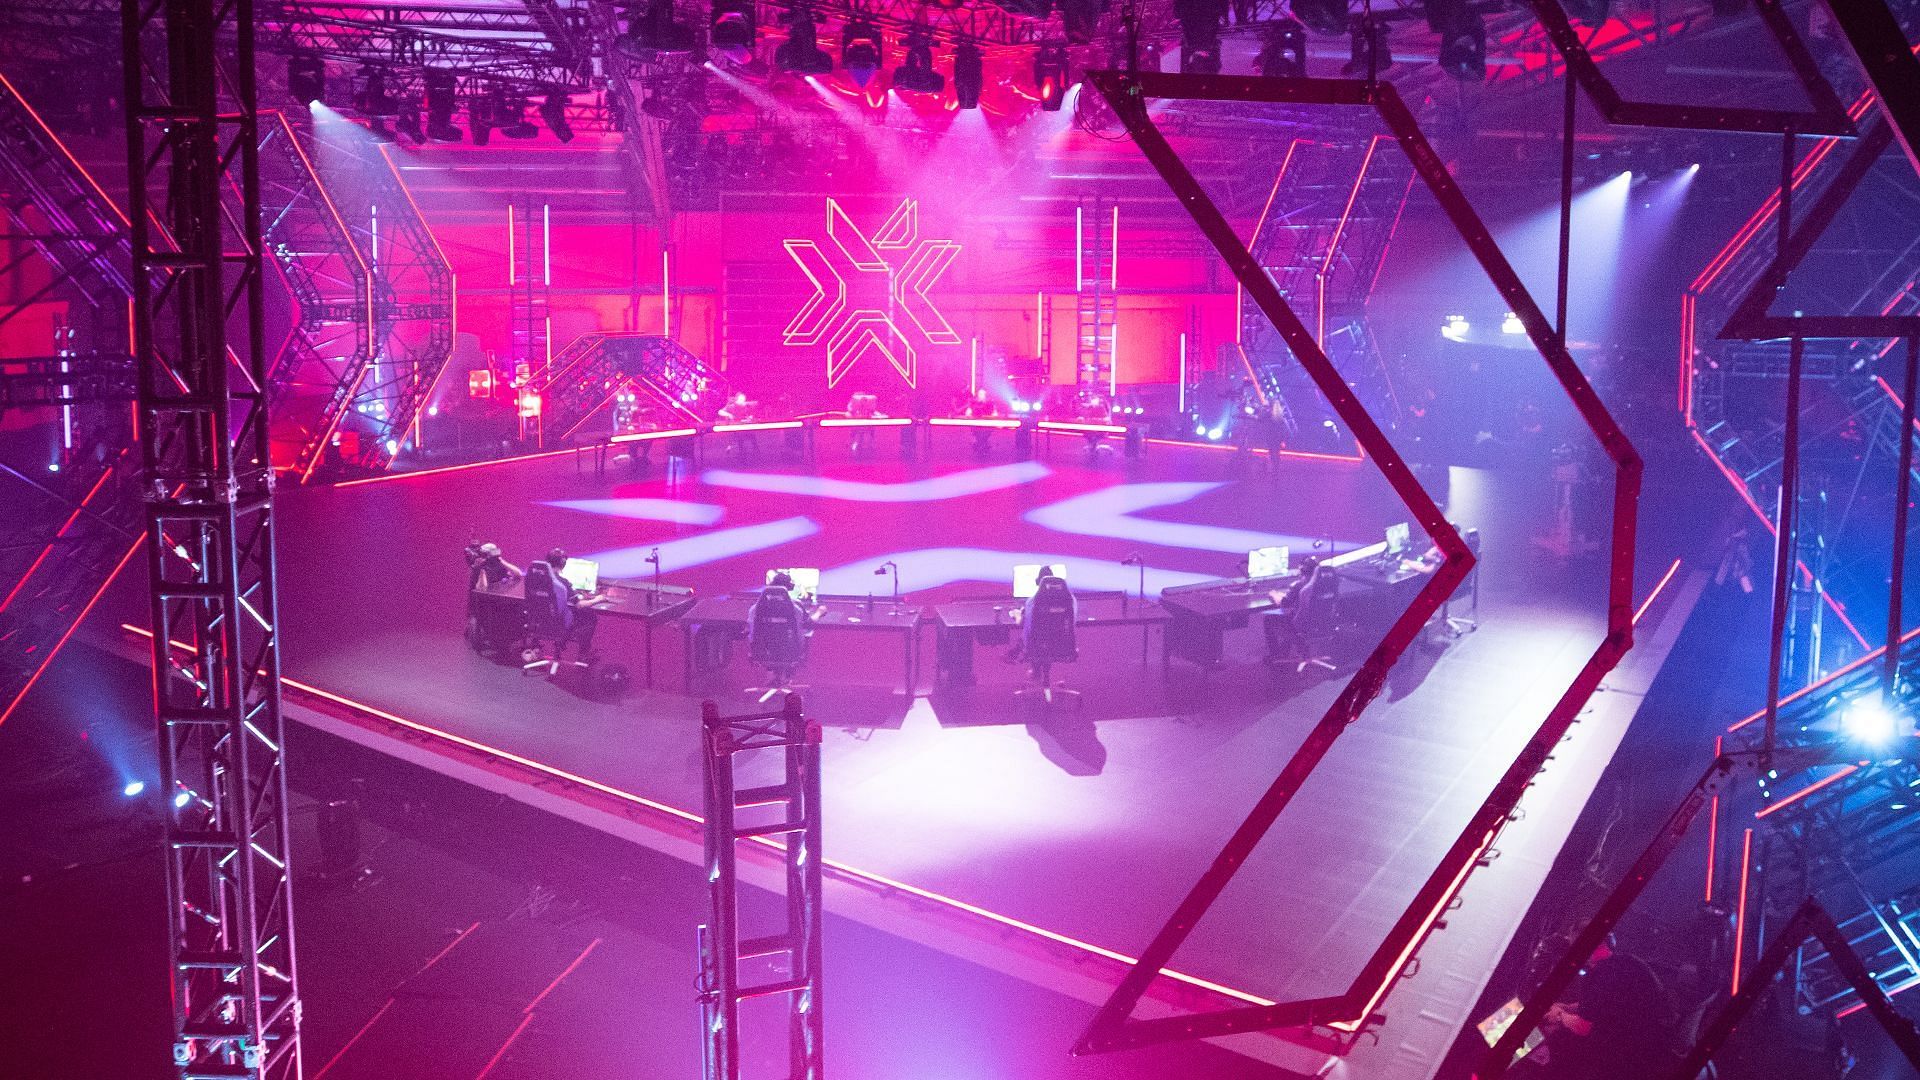 The VCT Masters 2022: Copenhagen will witness some really interesting matches (Image via Riot Games)